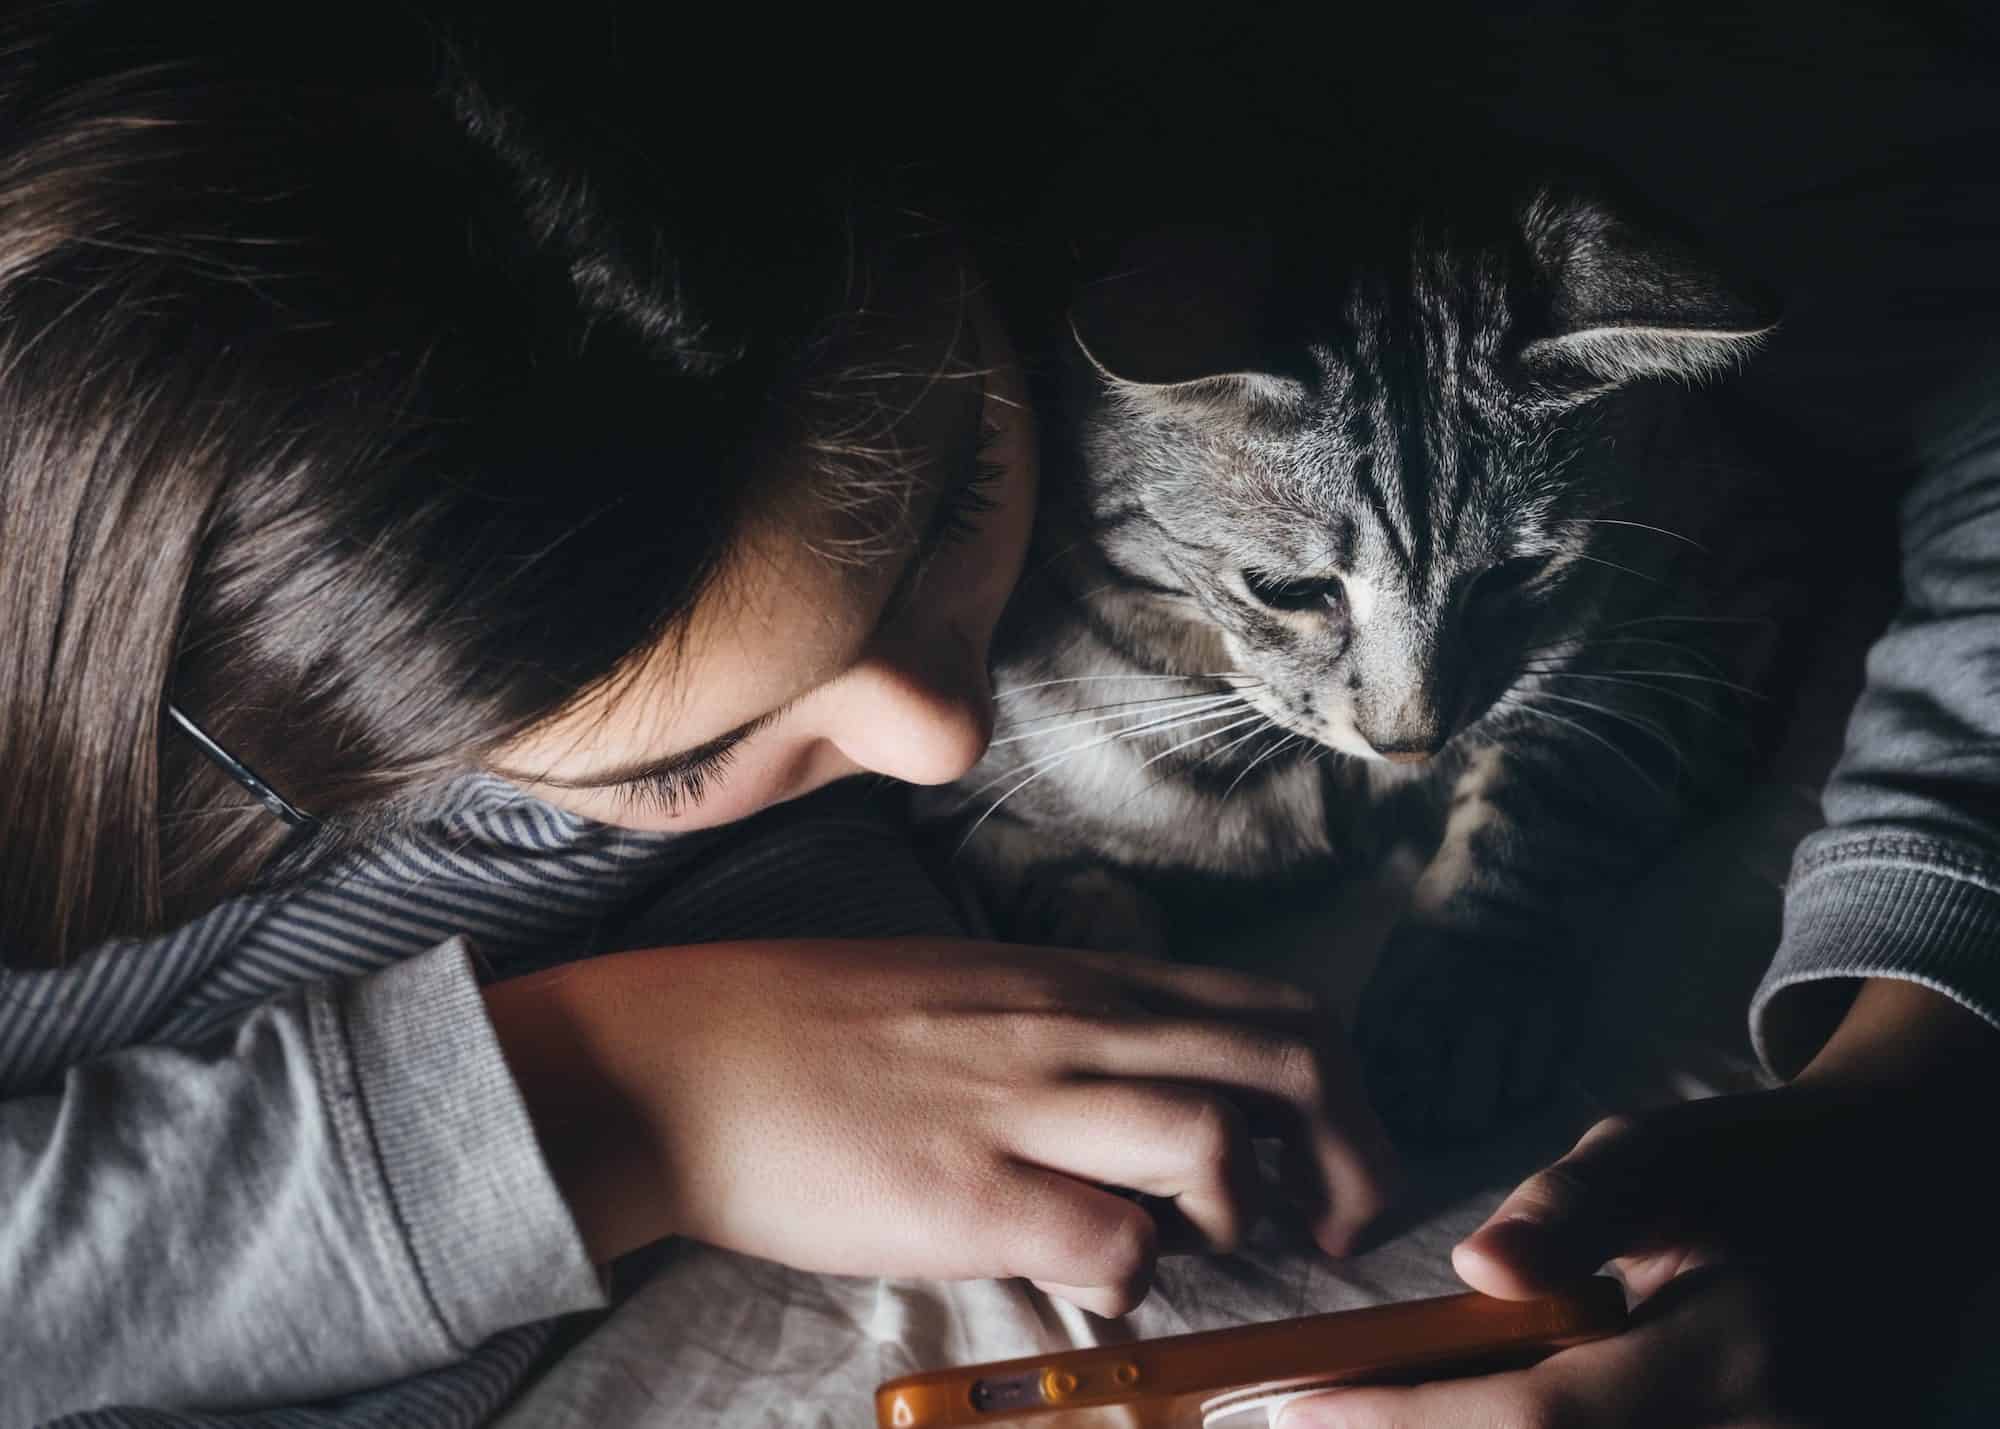 A little girl and a grey striped cat watching a movie on a cell phone together. 